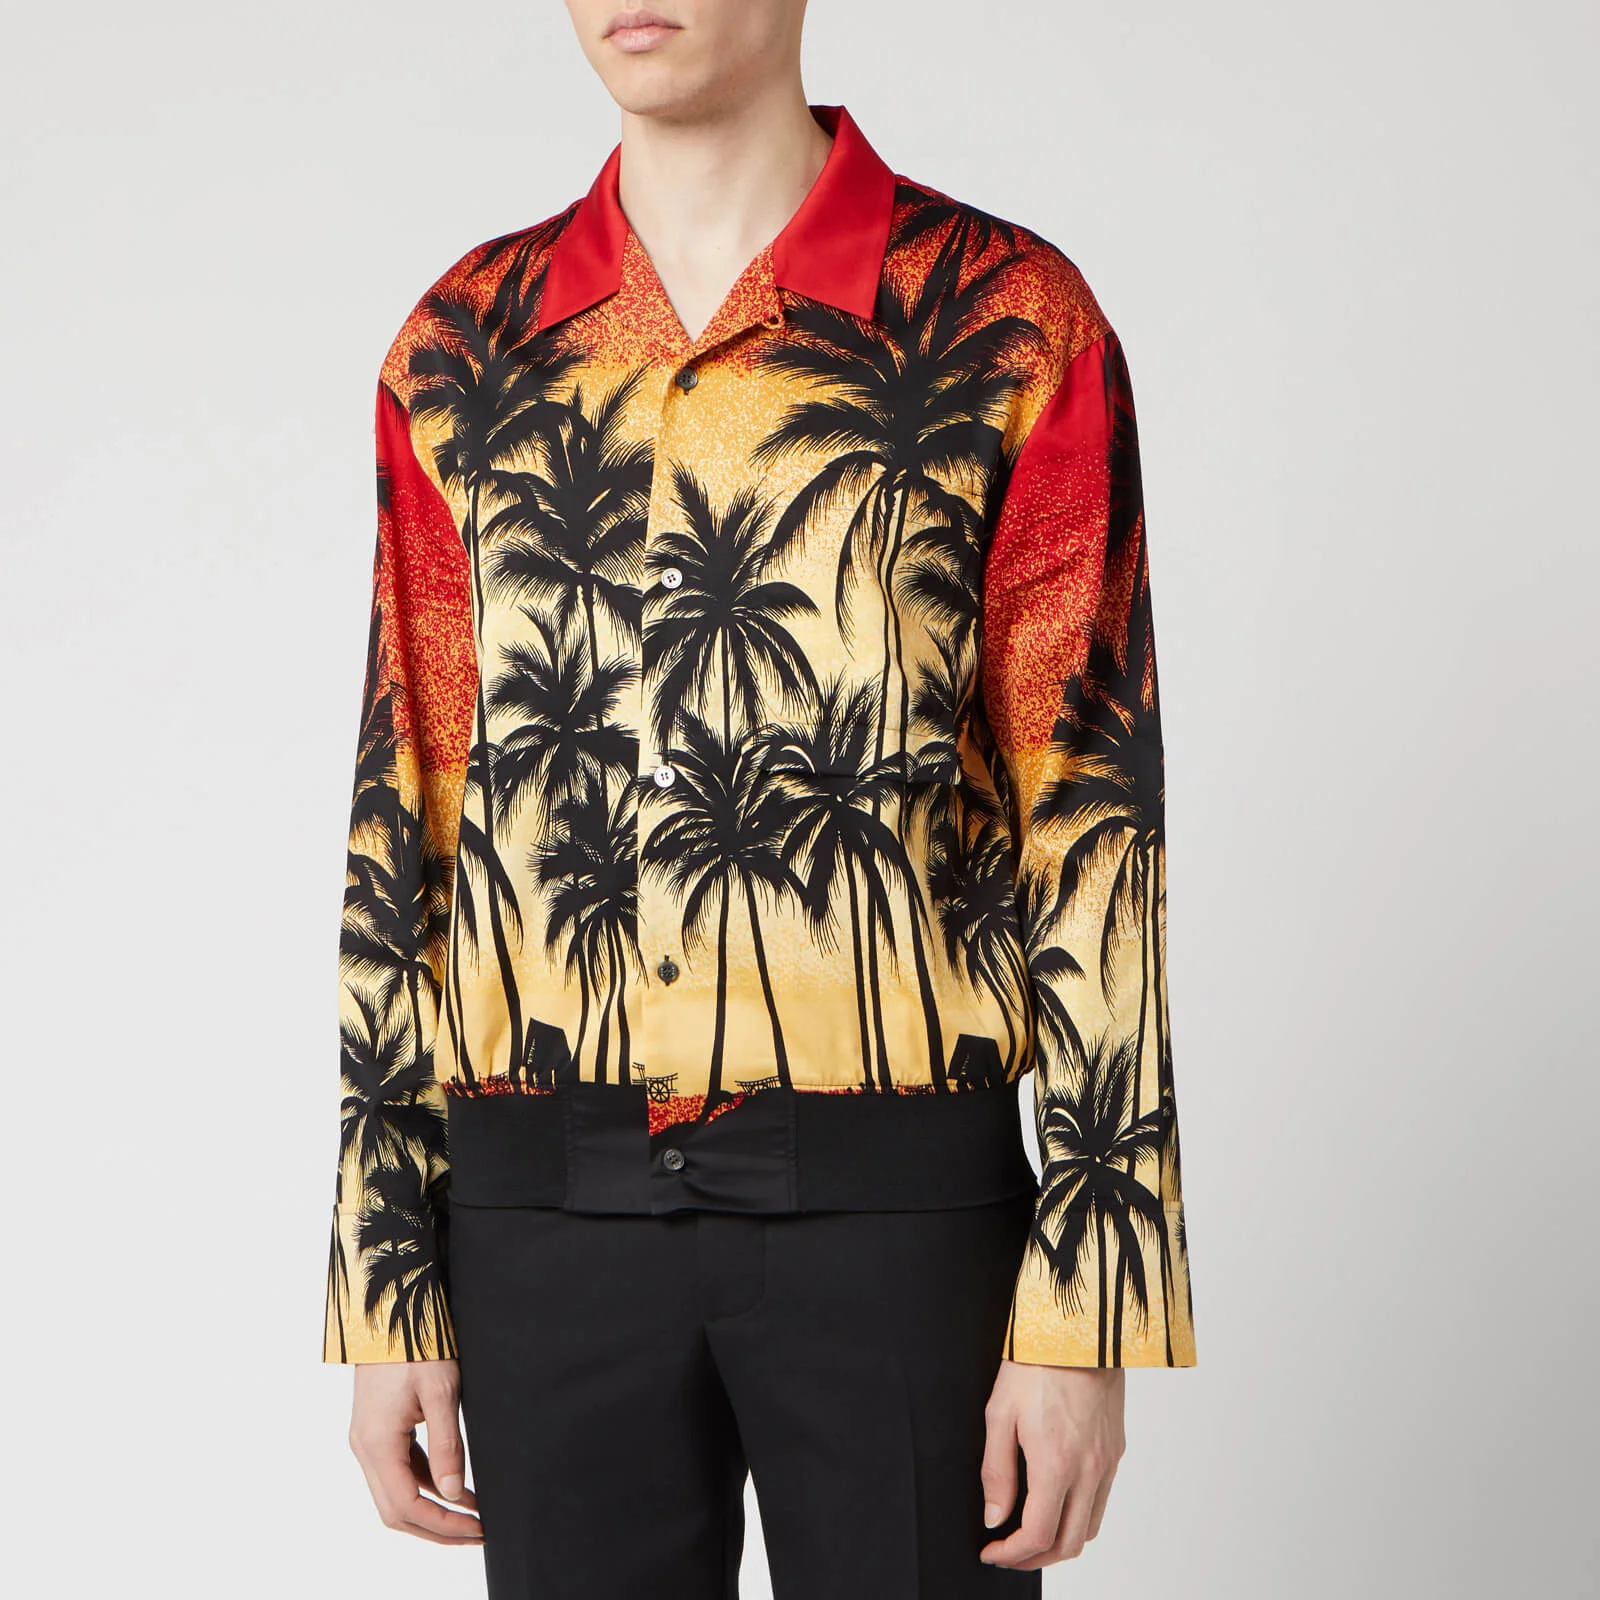 Wooyoungmi Men's Palm Print Shirt - Red Image 1